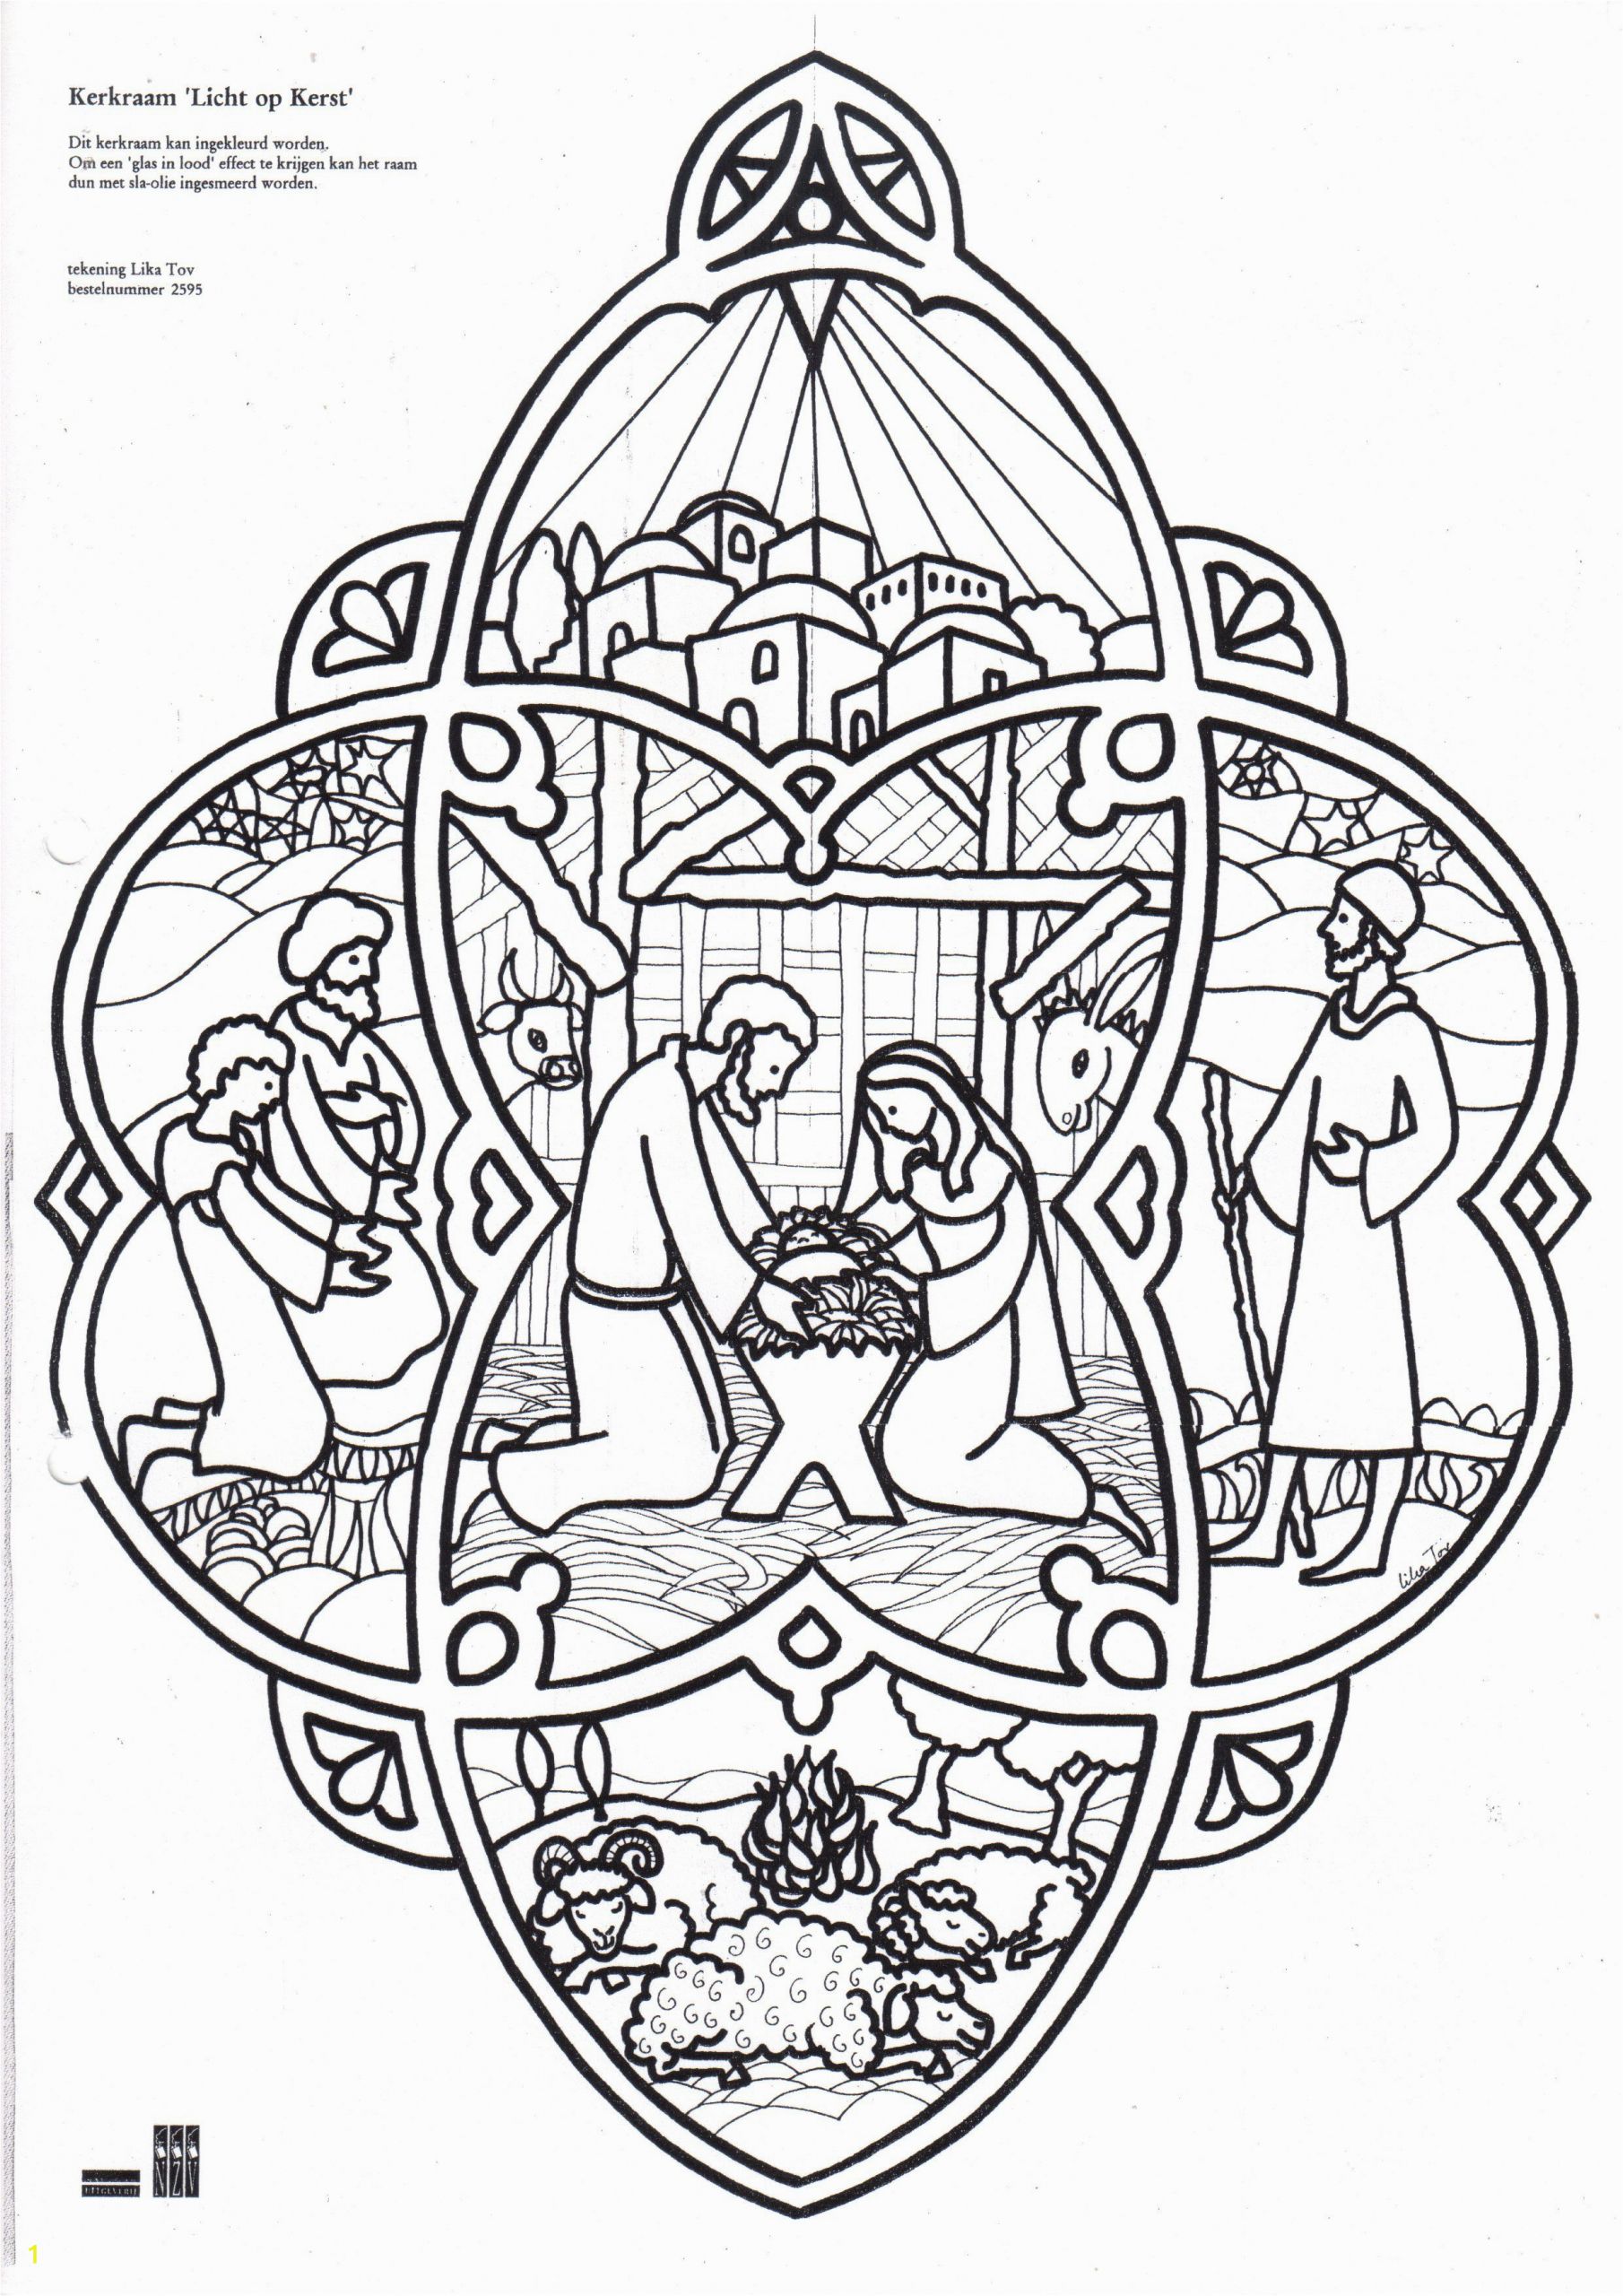 Christmas Nativity Coloring Pages for Adults Christmas Coloring Page Nativity